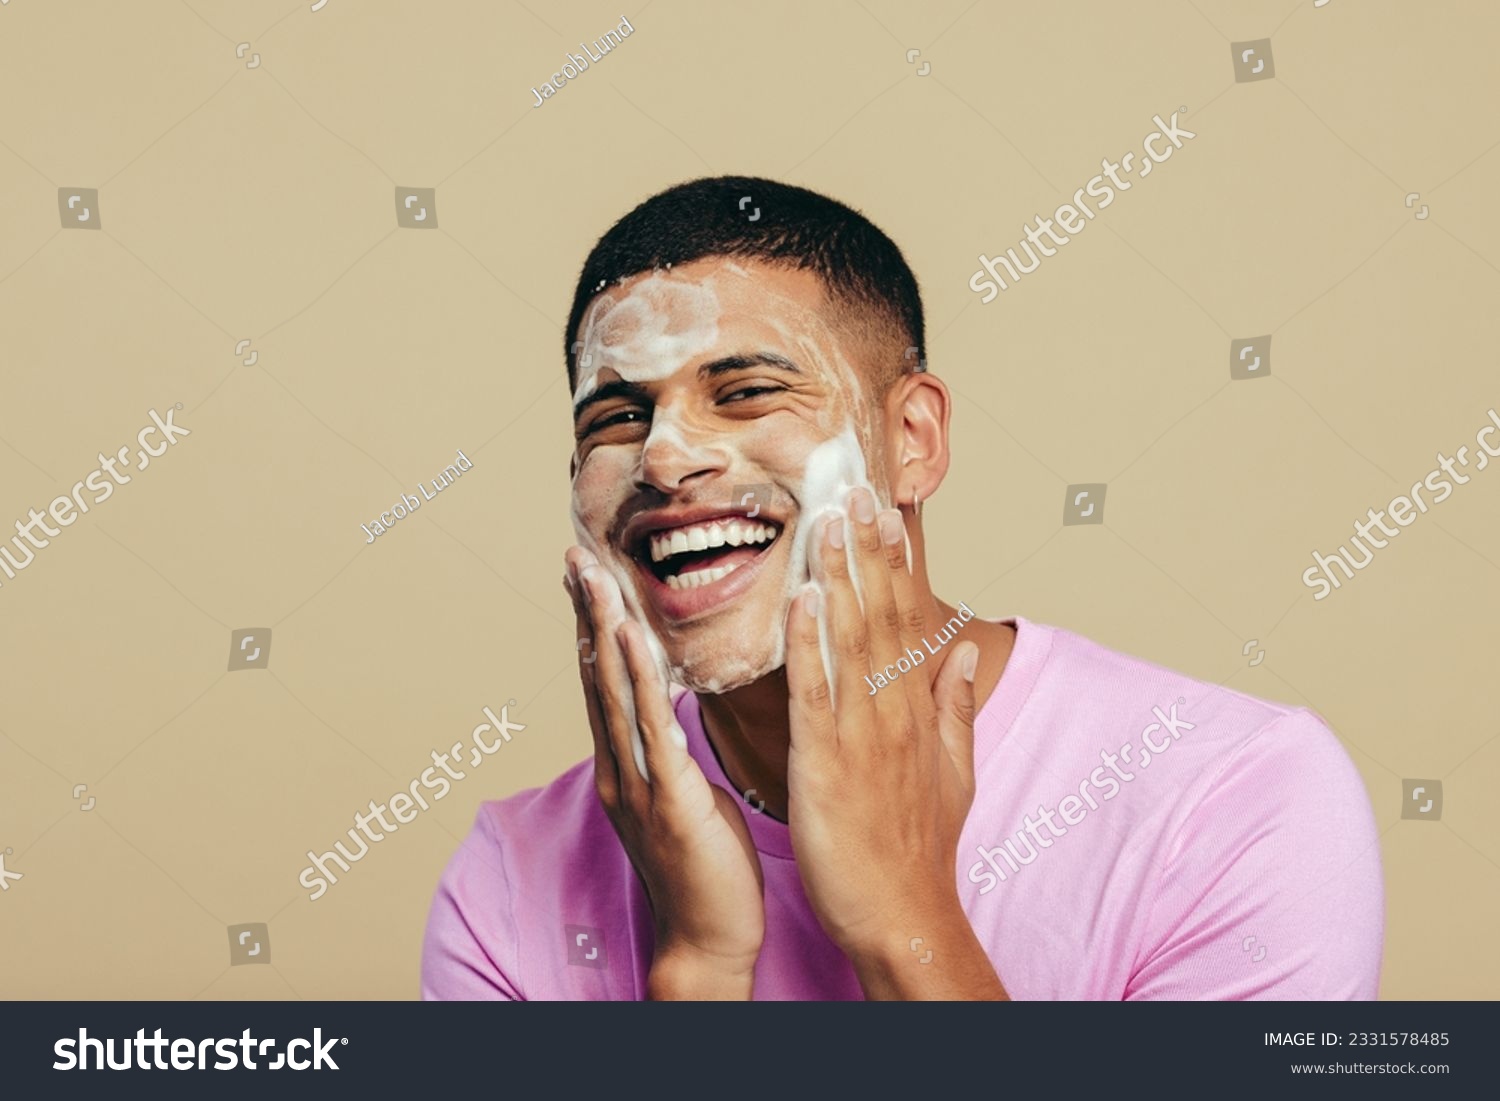 Portrait of a handsome young man indulging in his grooming and self-care routine as he applies face wash in a studio. Youthful man smiling happily while massaging his skin with a facial cleanser. #2331578485